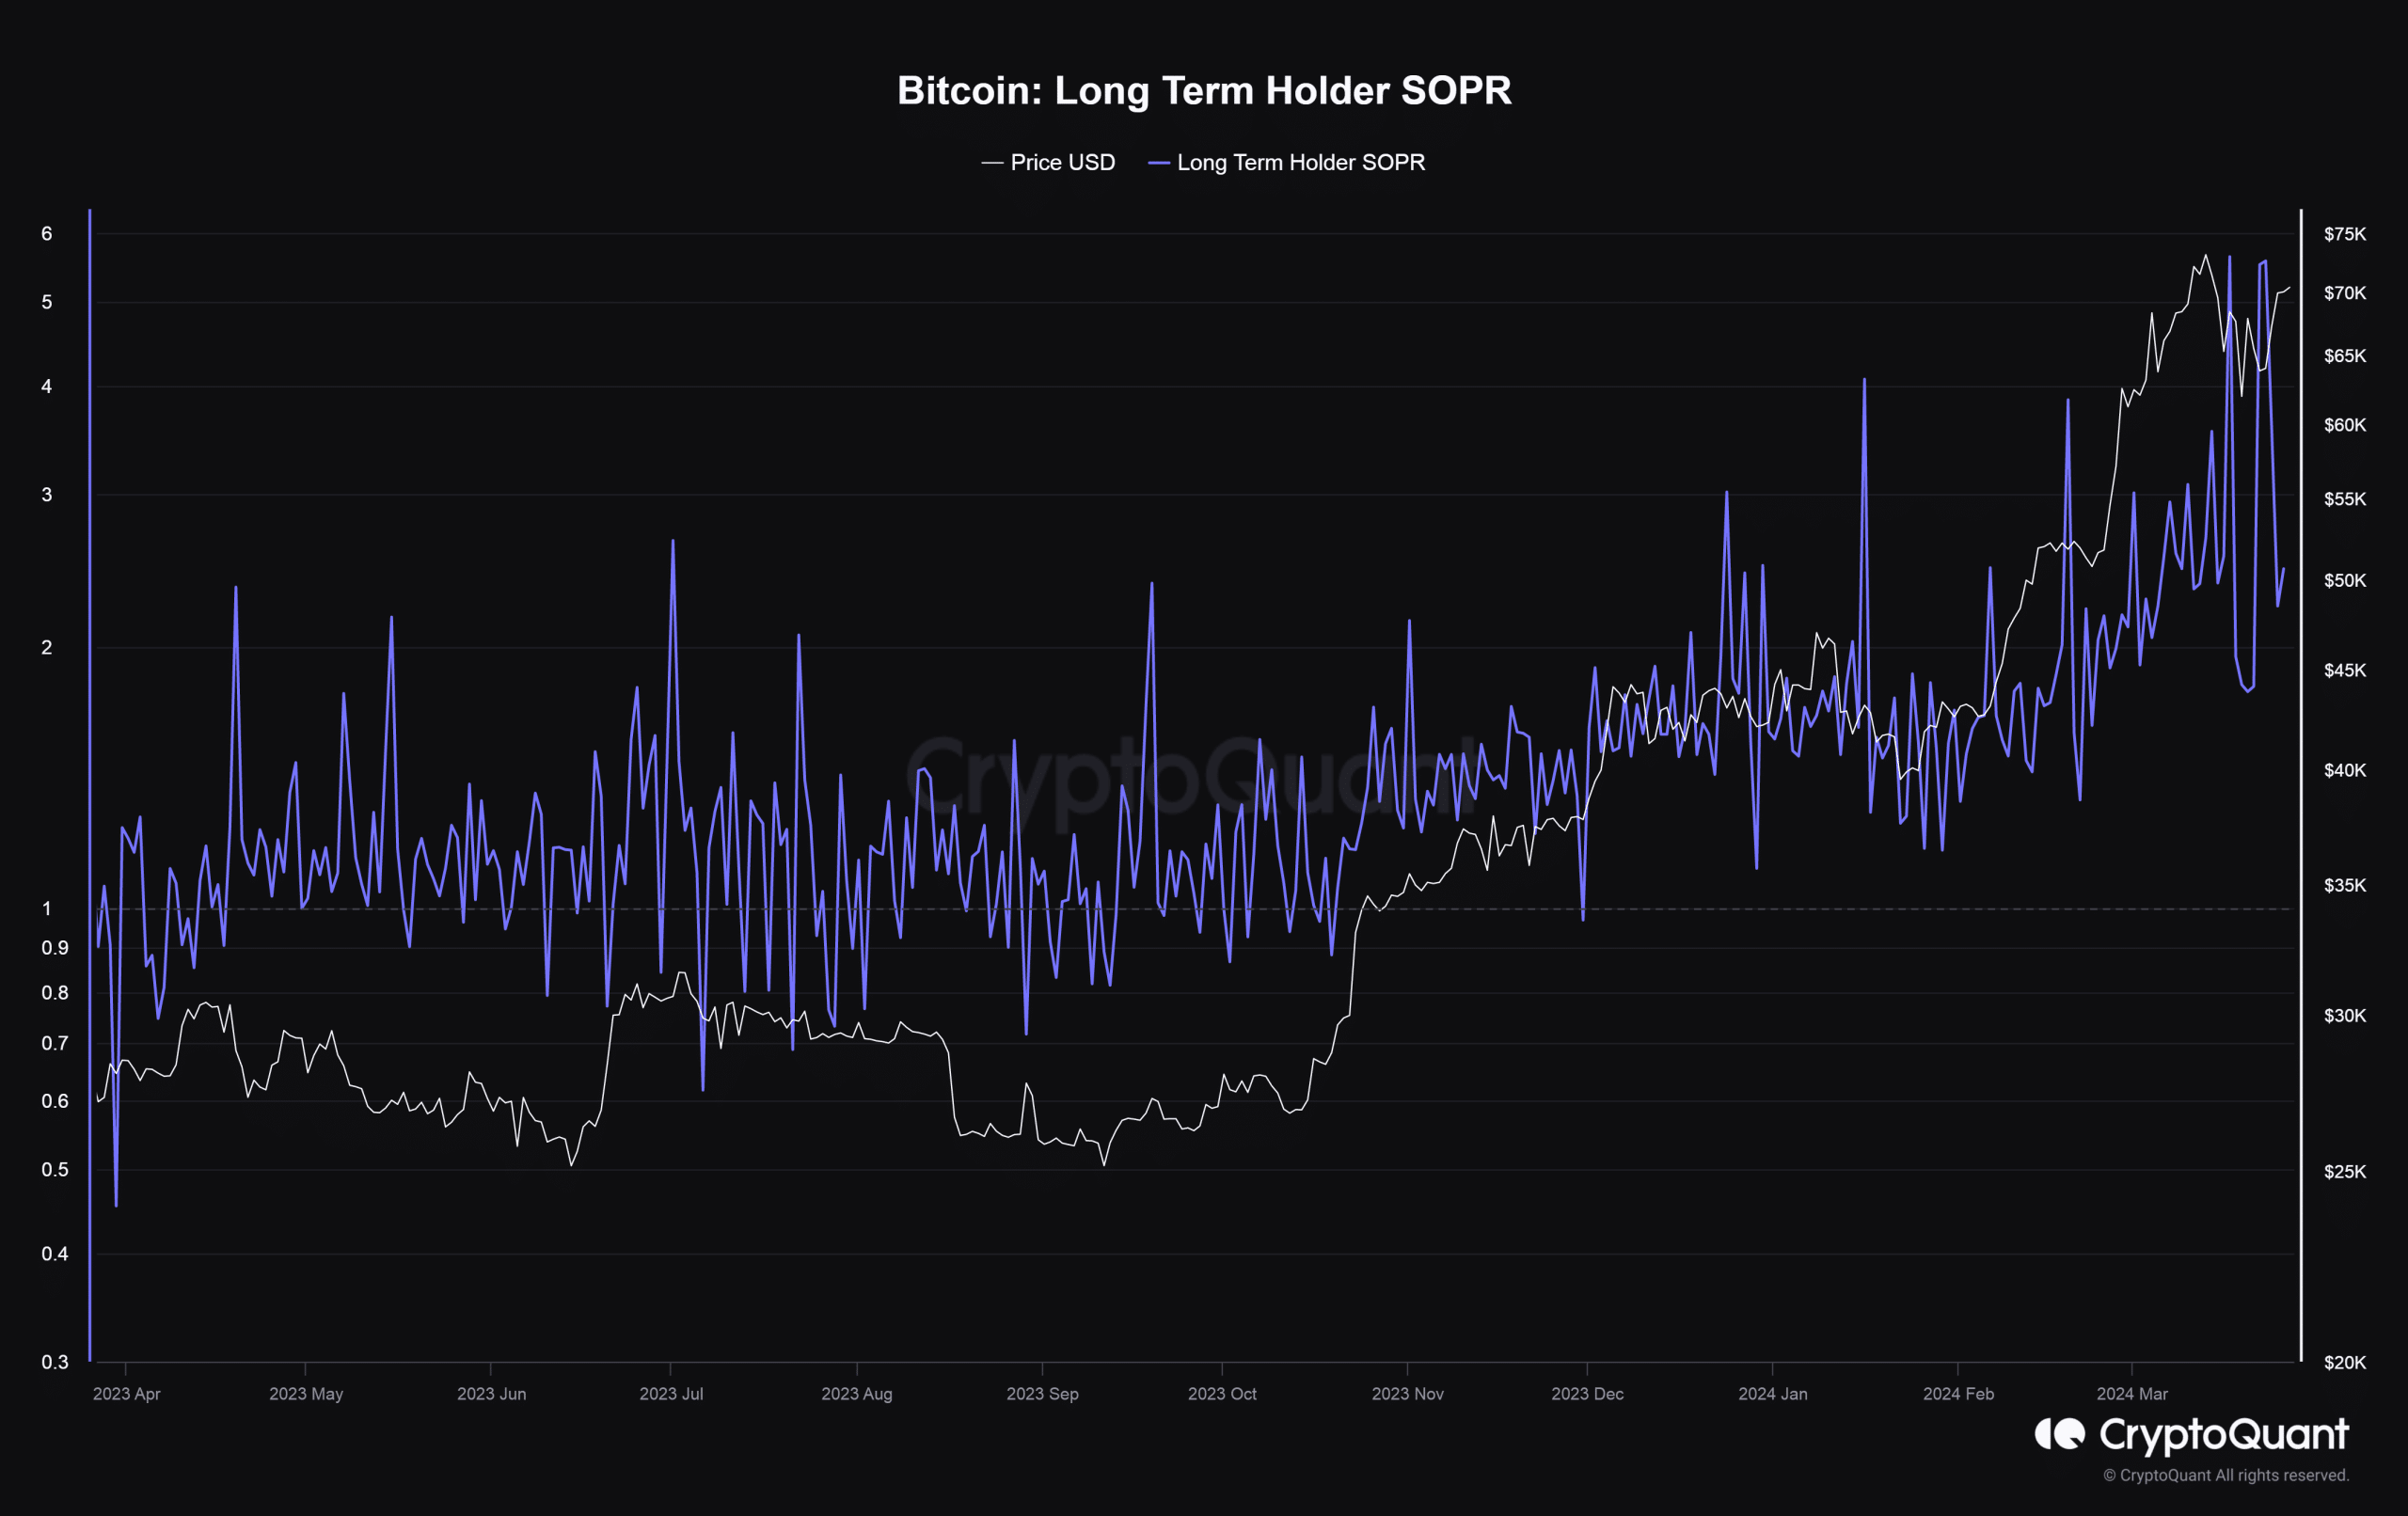 Bitcoin Profits for the Long Term